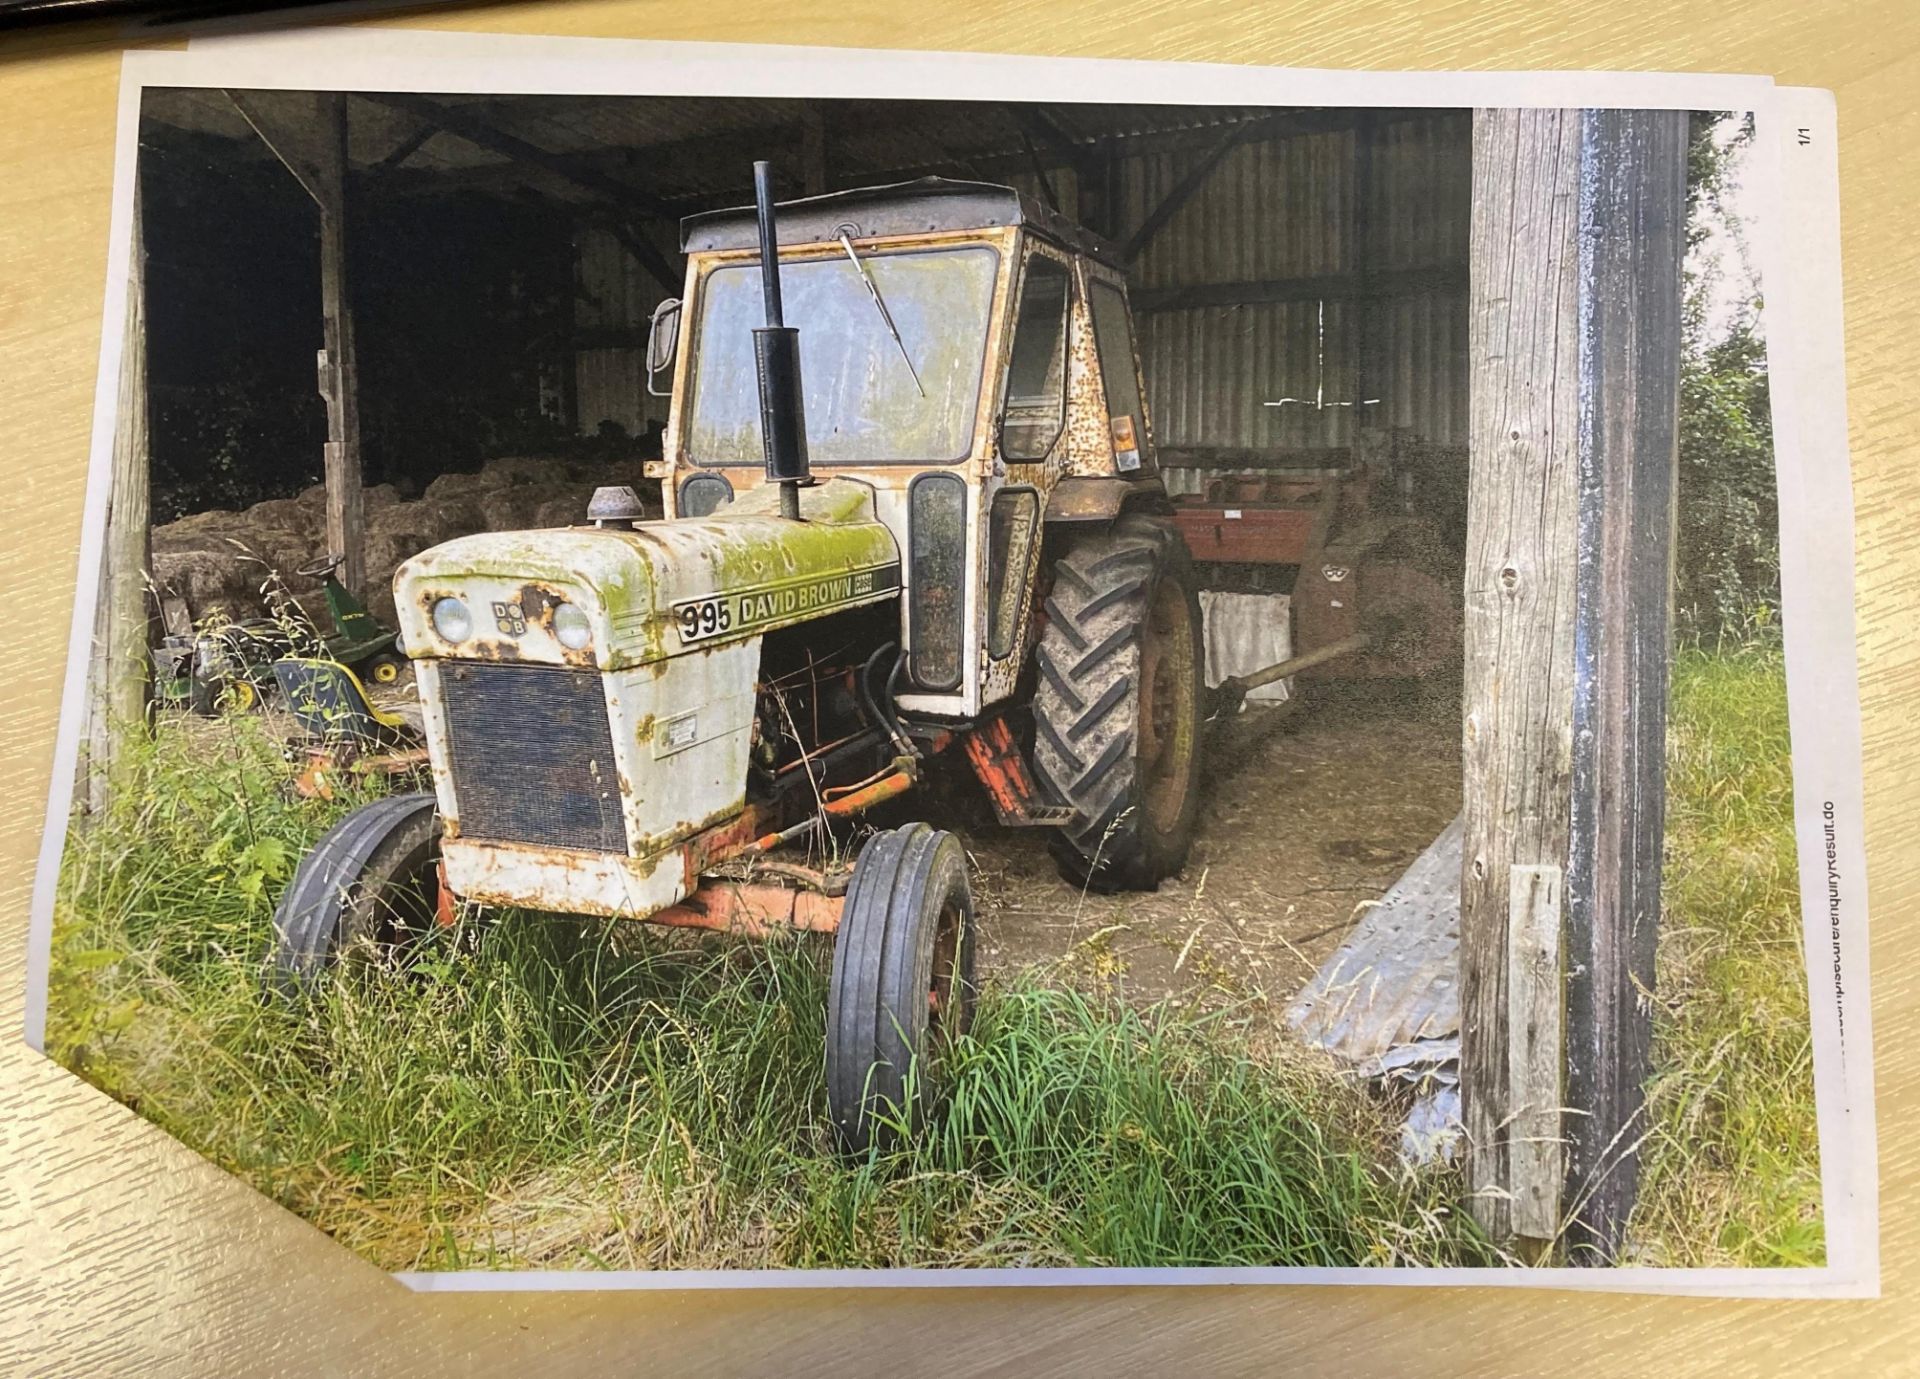 DAVID BROWN 995 CASE AGRICULTURAL TRACTOR complete with cab - White and red. From a deceased estate. - Image 10 of 16